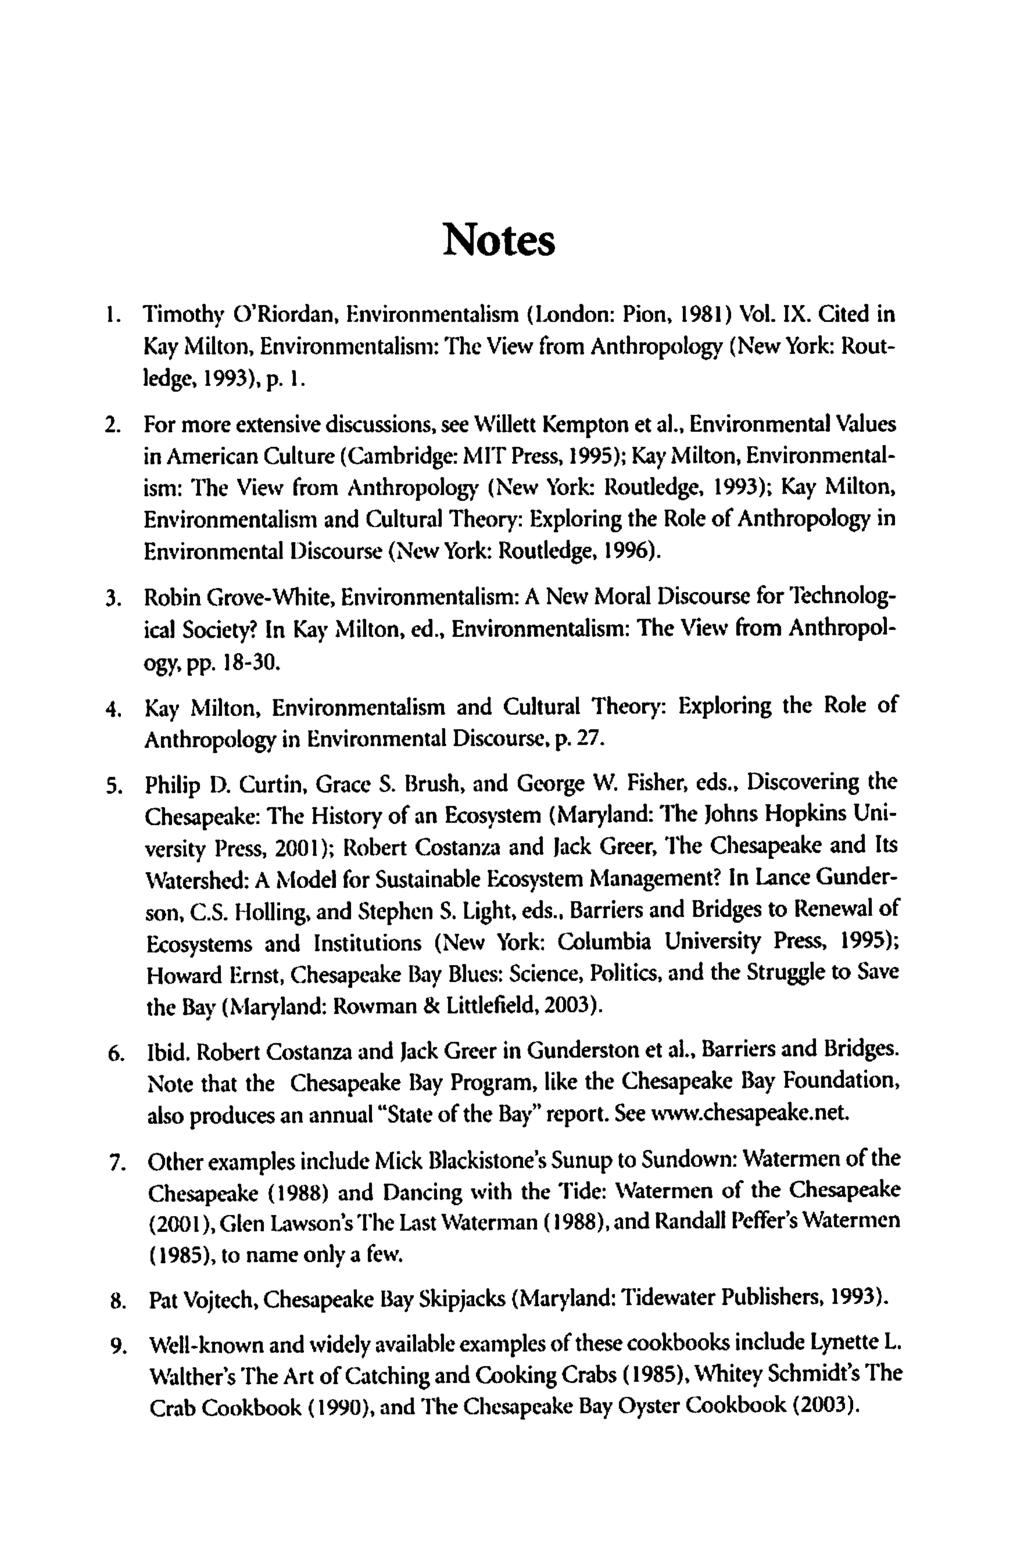 Notes 1. Timothy O'Riordan, Environmentalism (London: Pion, 1981) Vol. IX. Cited in Kay Milton, Environmentalism: The View from Anthropology (NewYork: Routledge, 1993),p. 1. 2.